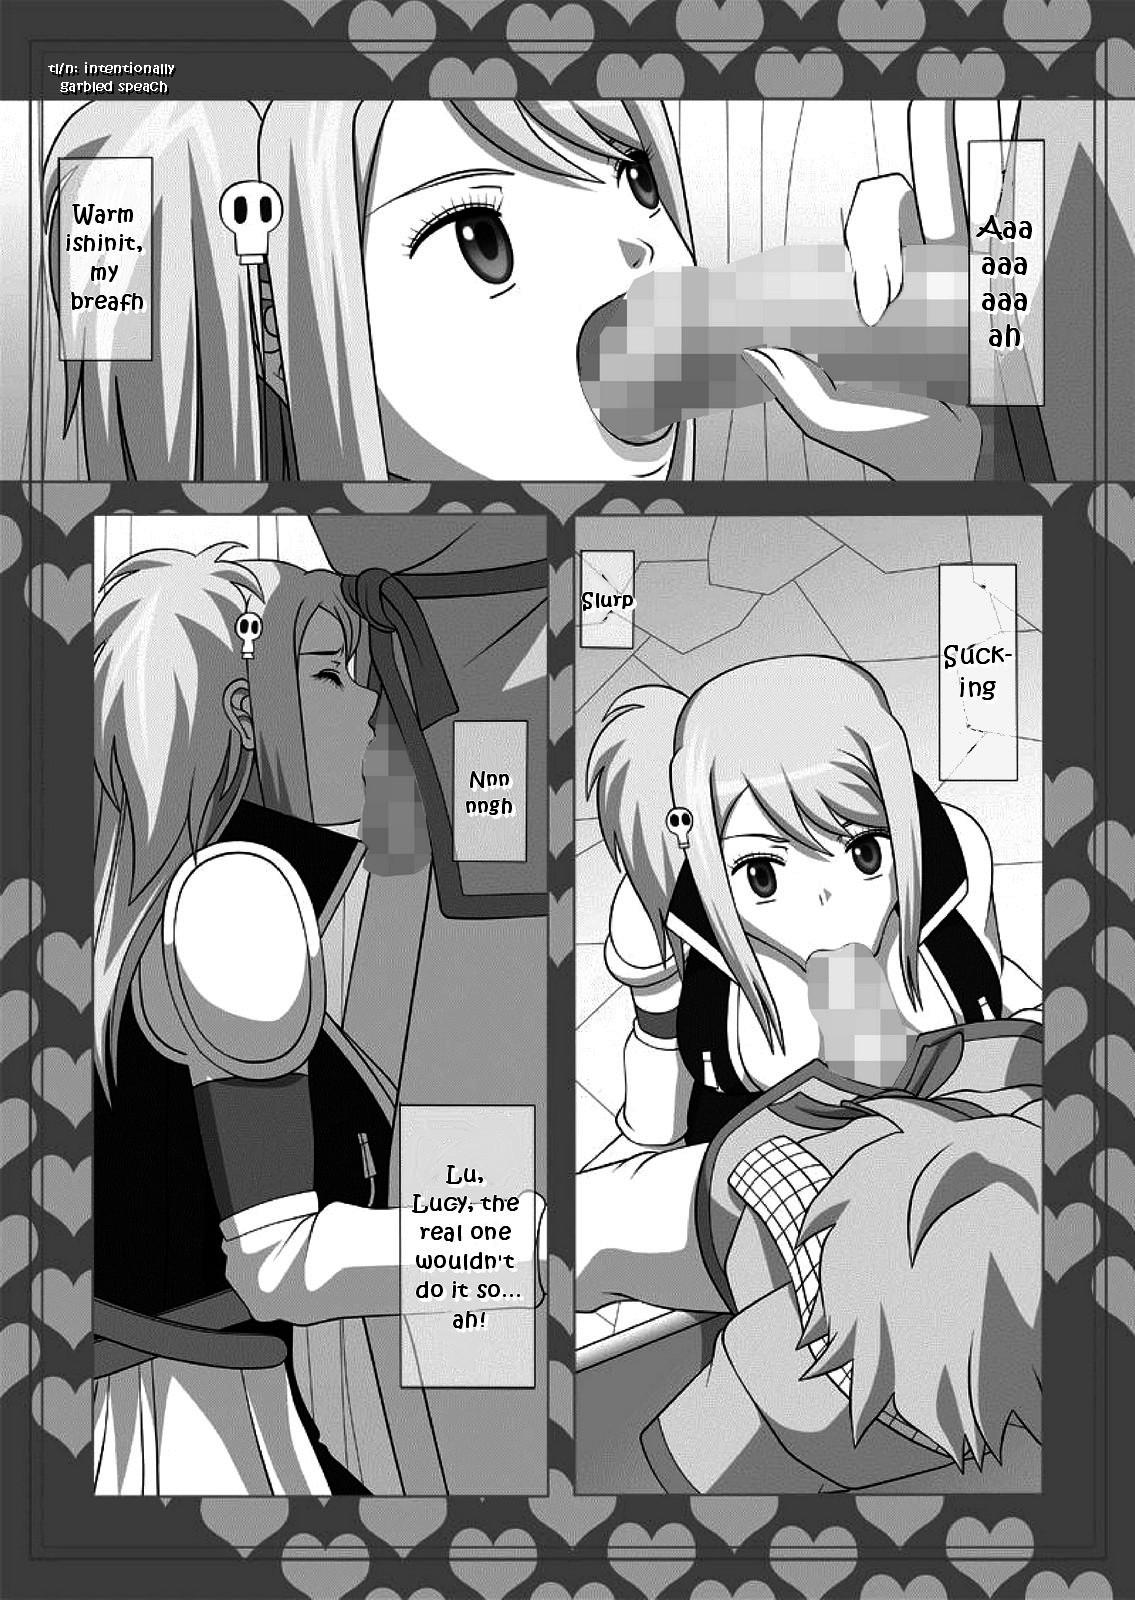 Adult [NAVY (Kisyuu Naoyuki)] Okuchi no Ehon Vol. 36 Sweethole -Lucy Lucy- | Picture Book of the Mouth Vol. 36 Sweethole -Lucy Lucy- Mouth is Lover (Fairy Tail) [English] [EHCOVE] [Digital] - Fairy tail Amature Sex - Page 6